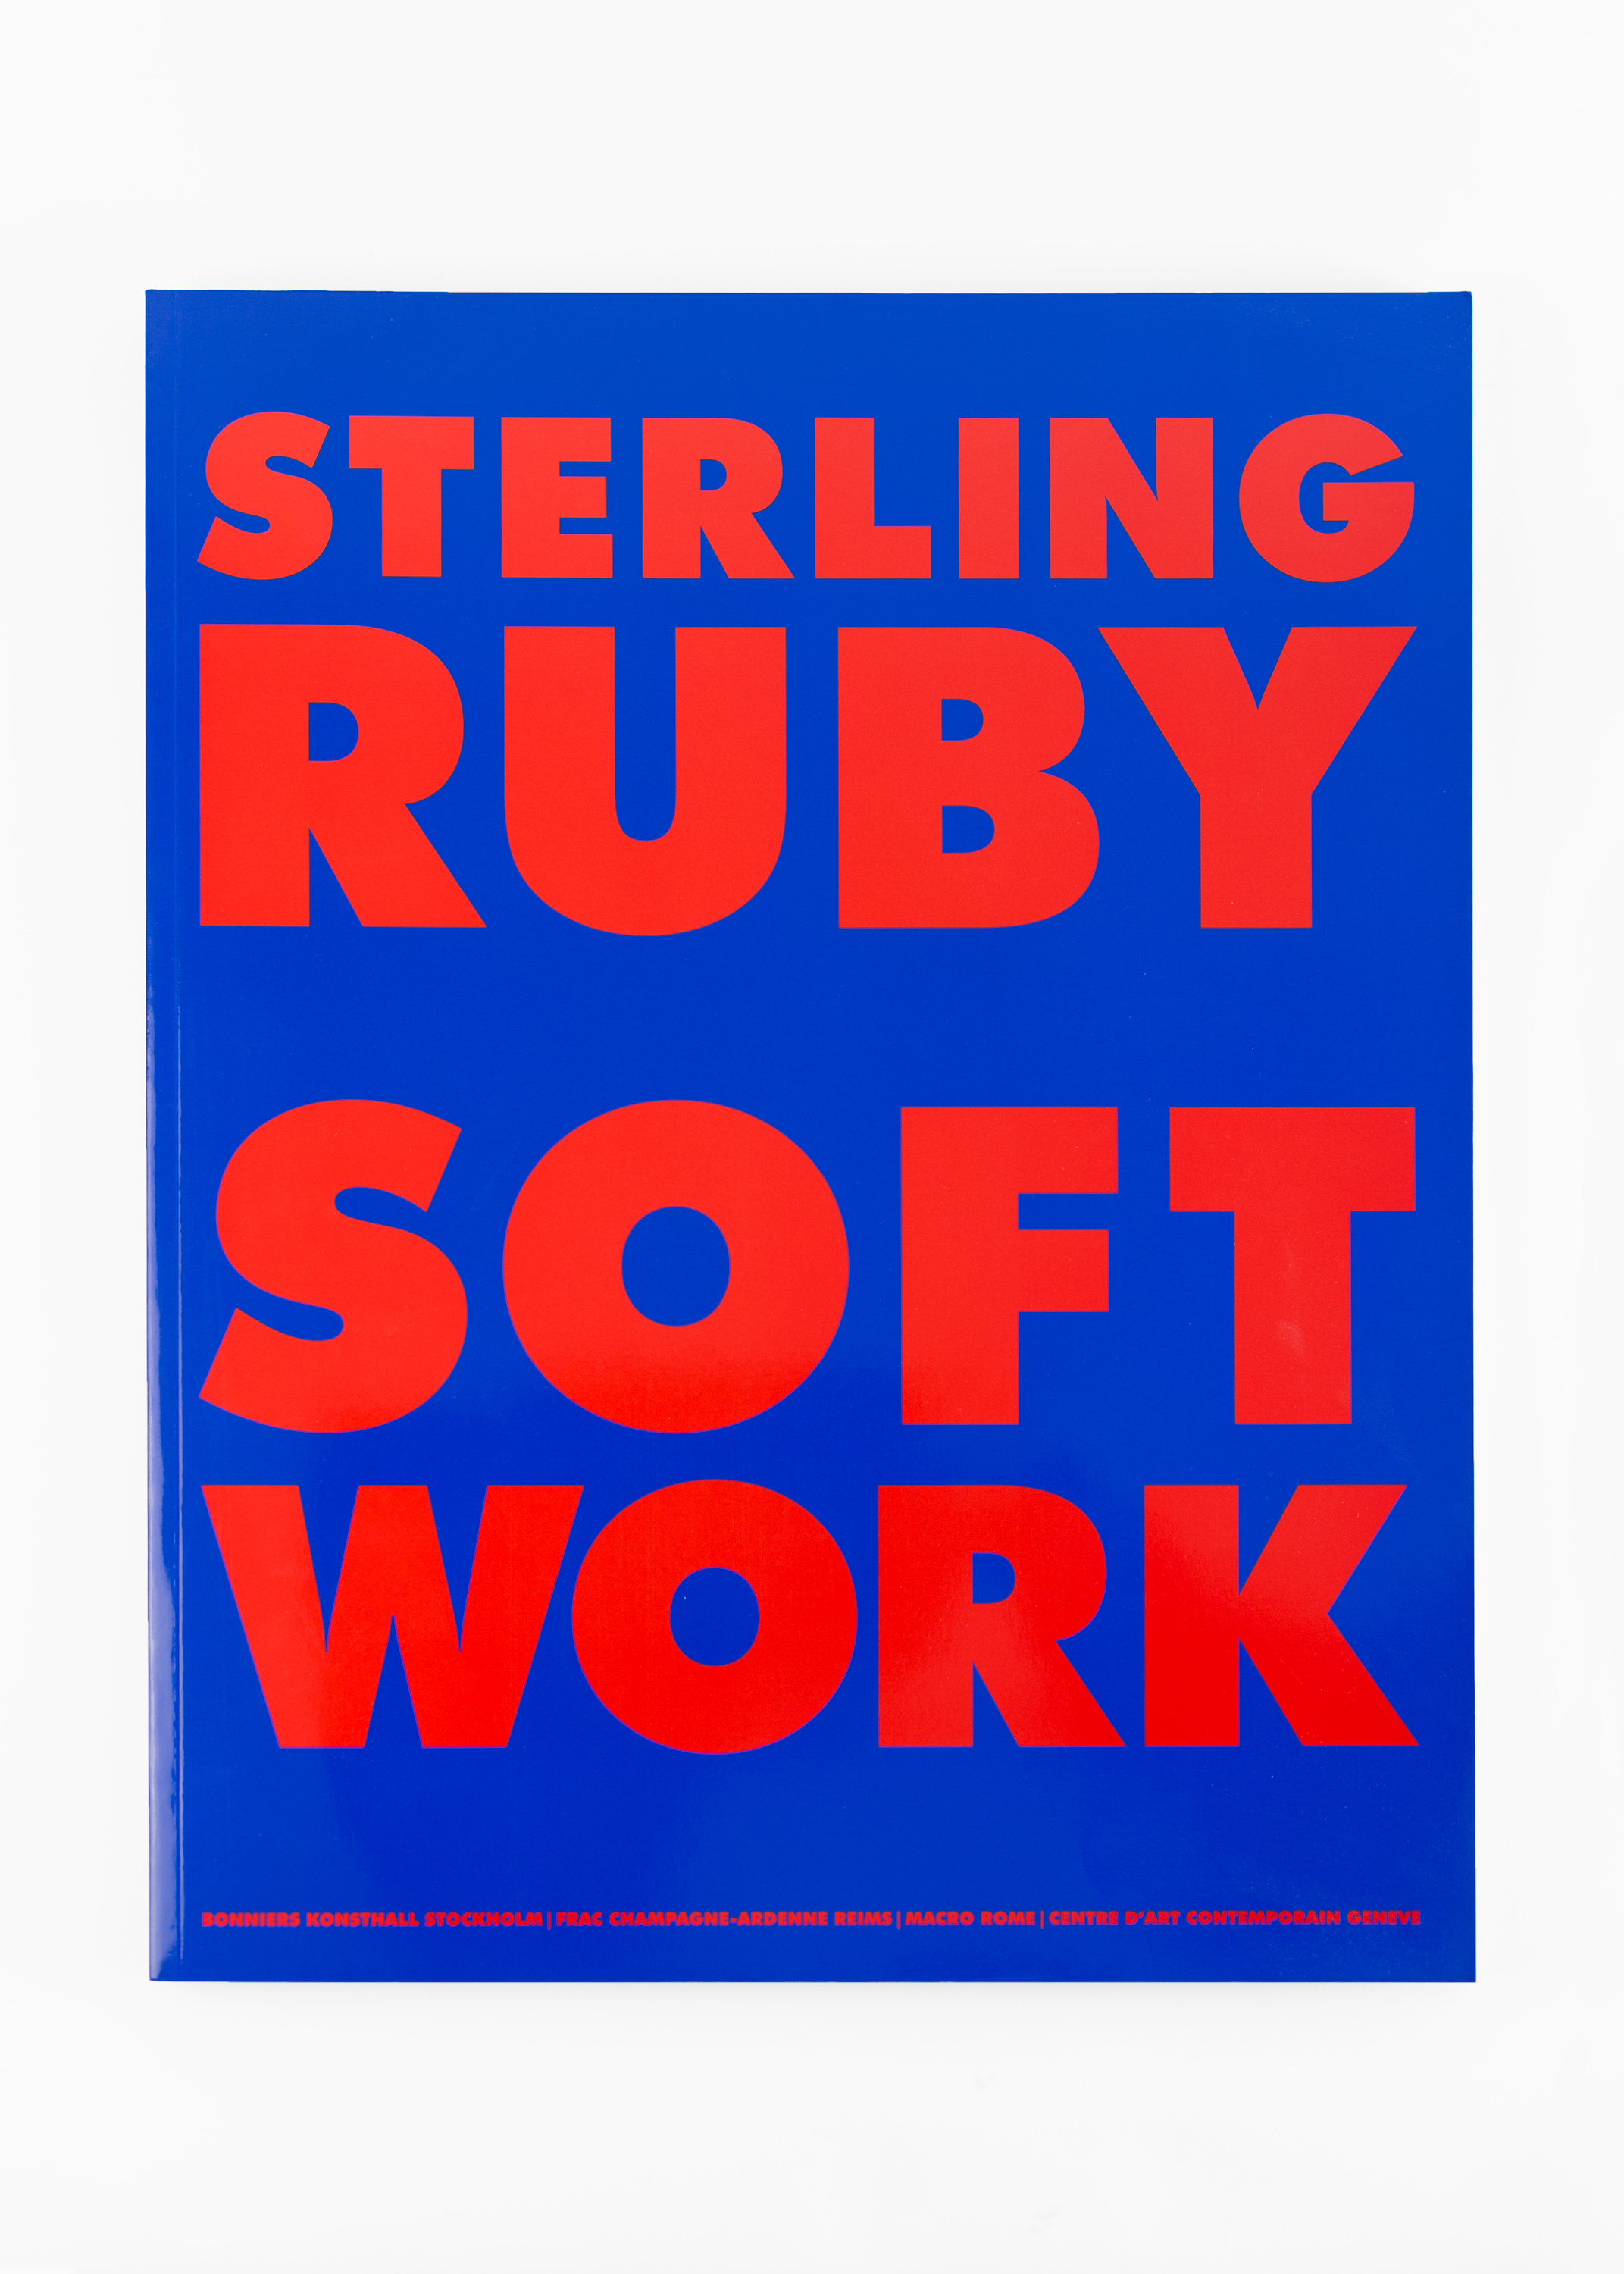 Sterling Ruby - Softwork</br>150 pages 28 x 38 cm</br>Walther König 2014</br>€50 <a href="https://www.paypal.com/cgi-bin/webscr?cmd=_s-xclick&amp;hosted_button_id=ZKBGAAETSQJUL">Add to Cart</a>